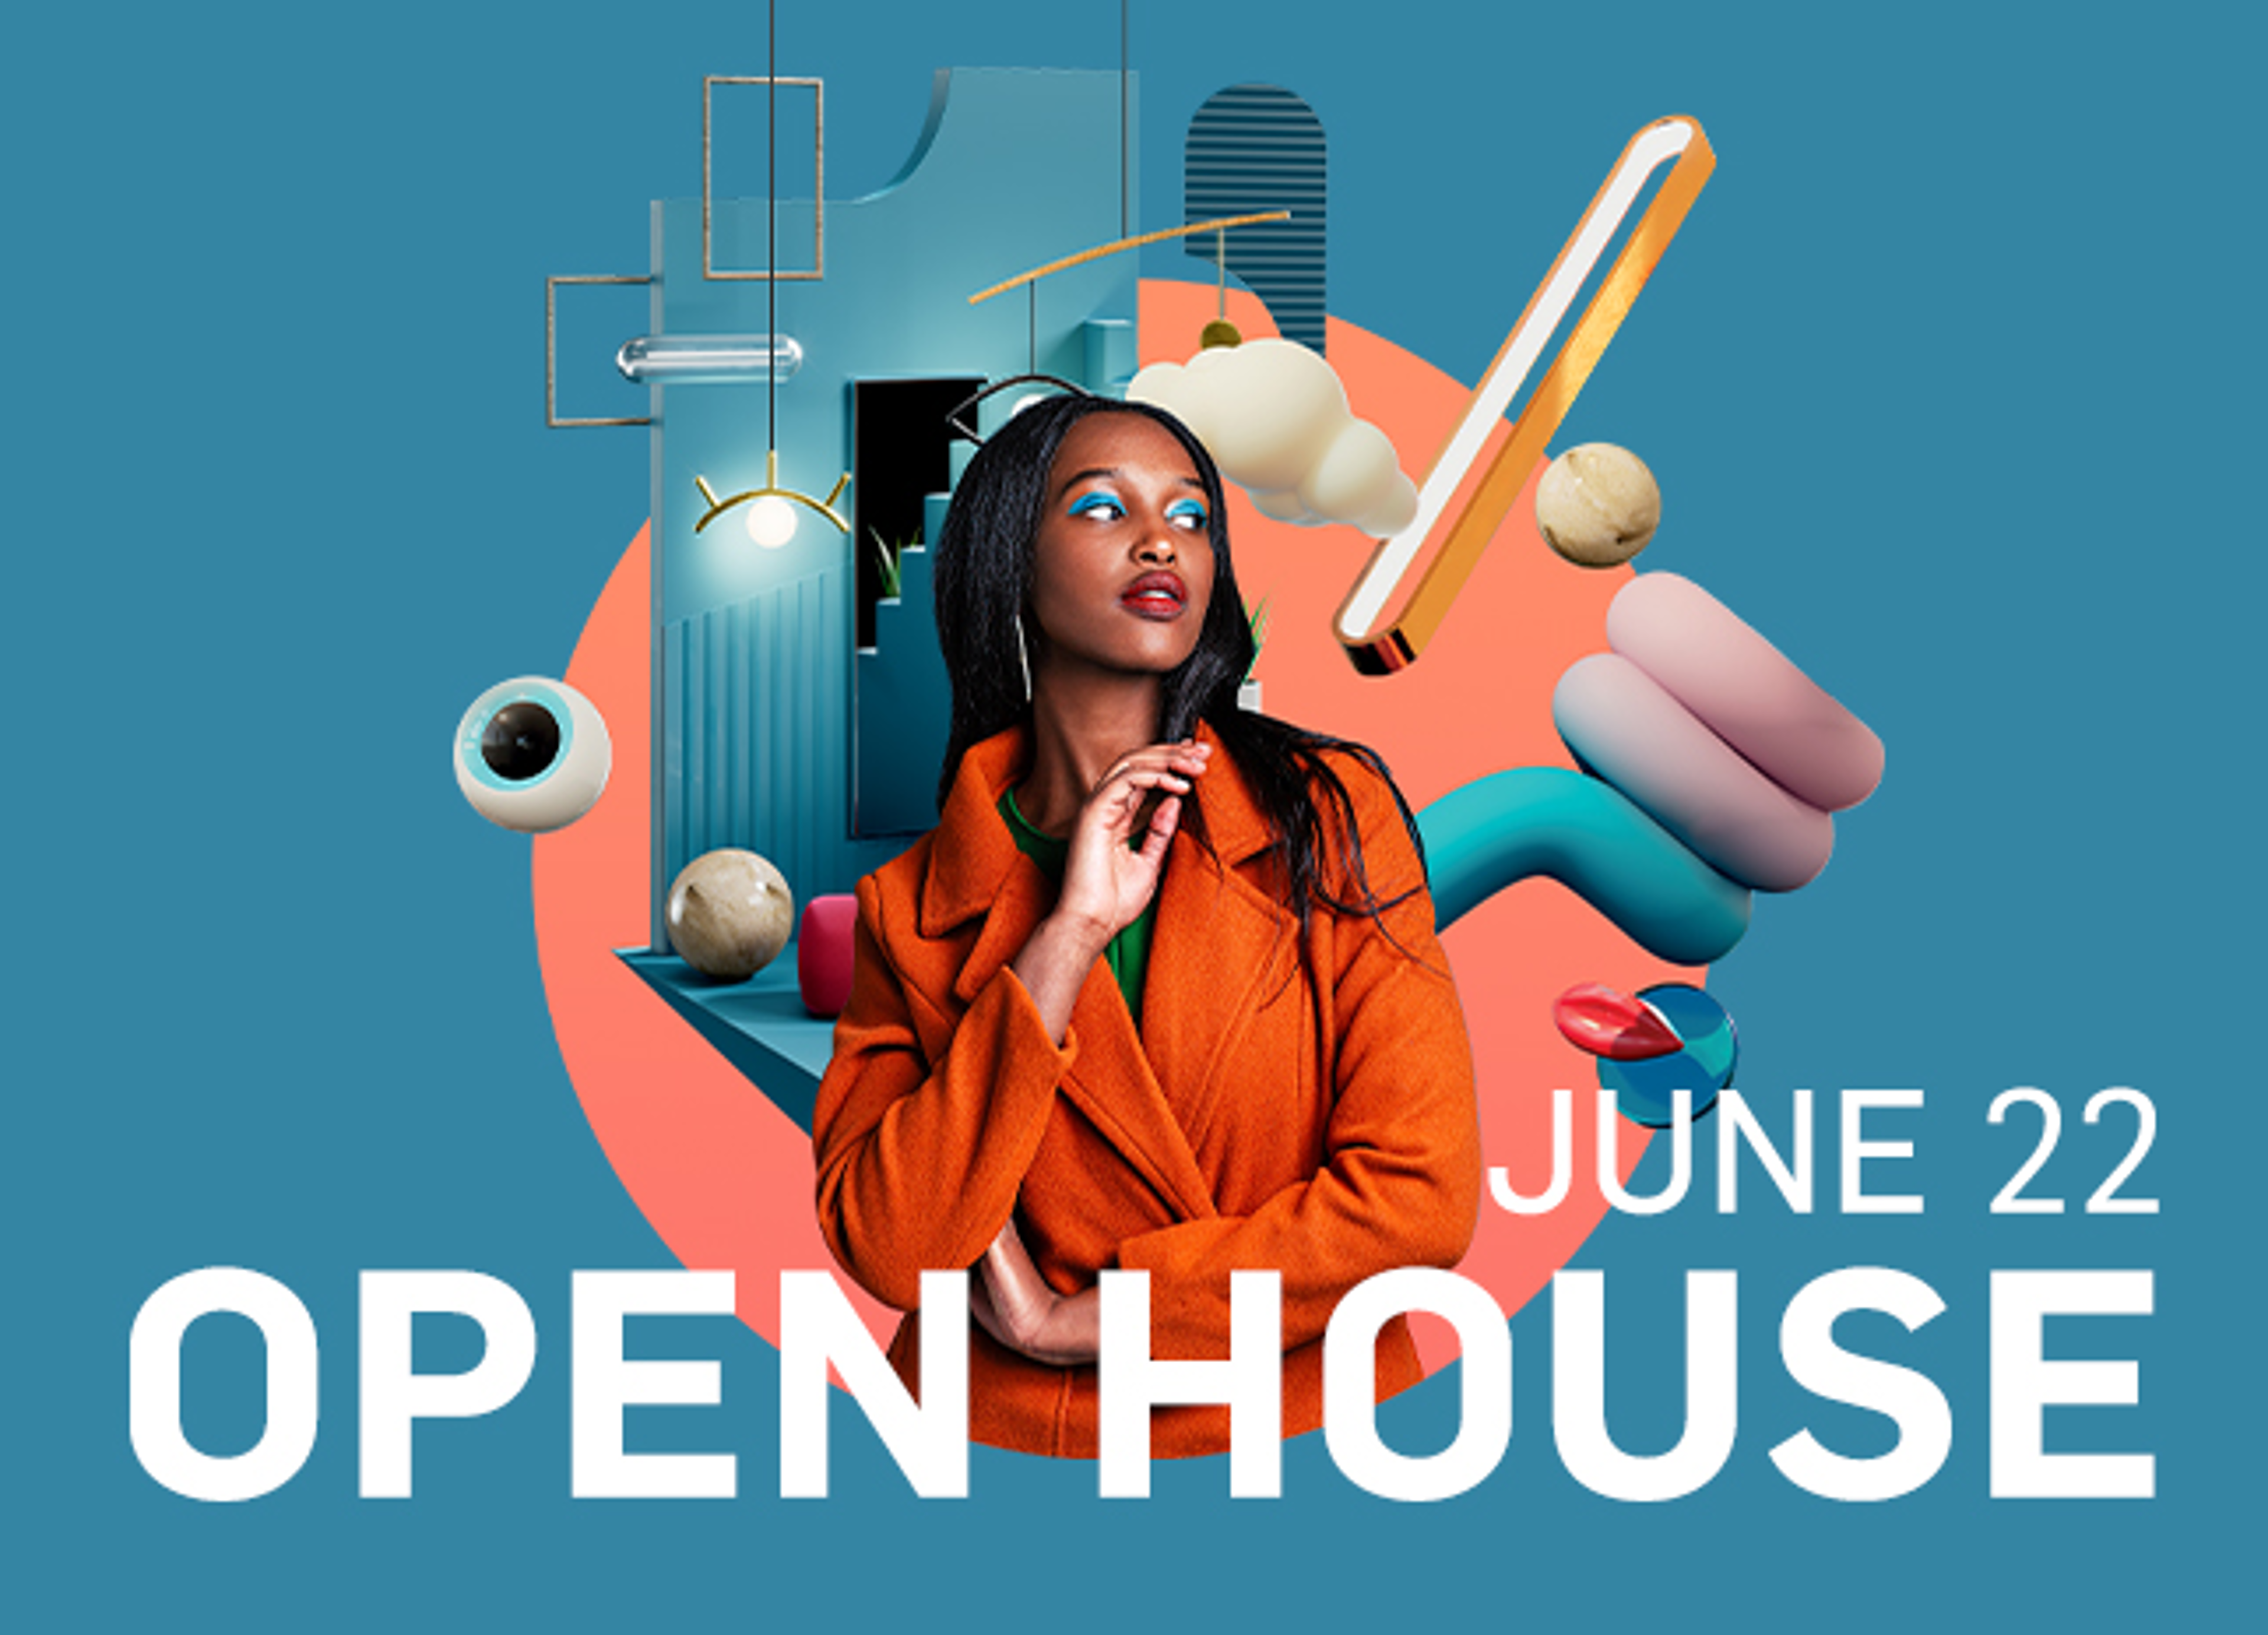 A stylish young woman in an orange coat contemplates abstract objects on a vibrant turquoise background promoting an 'Open House' event on June 22.